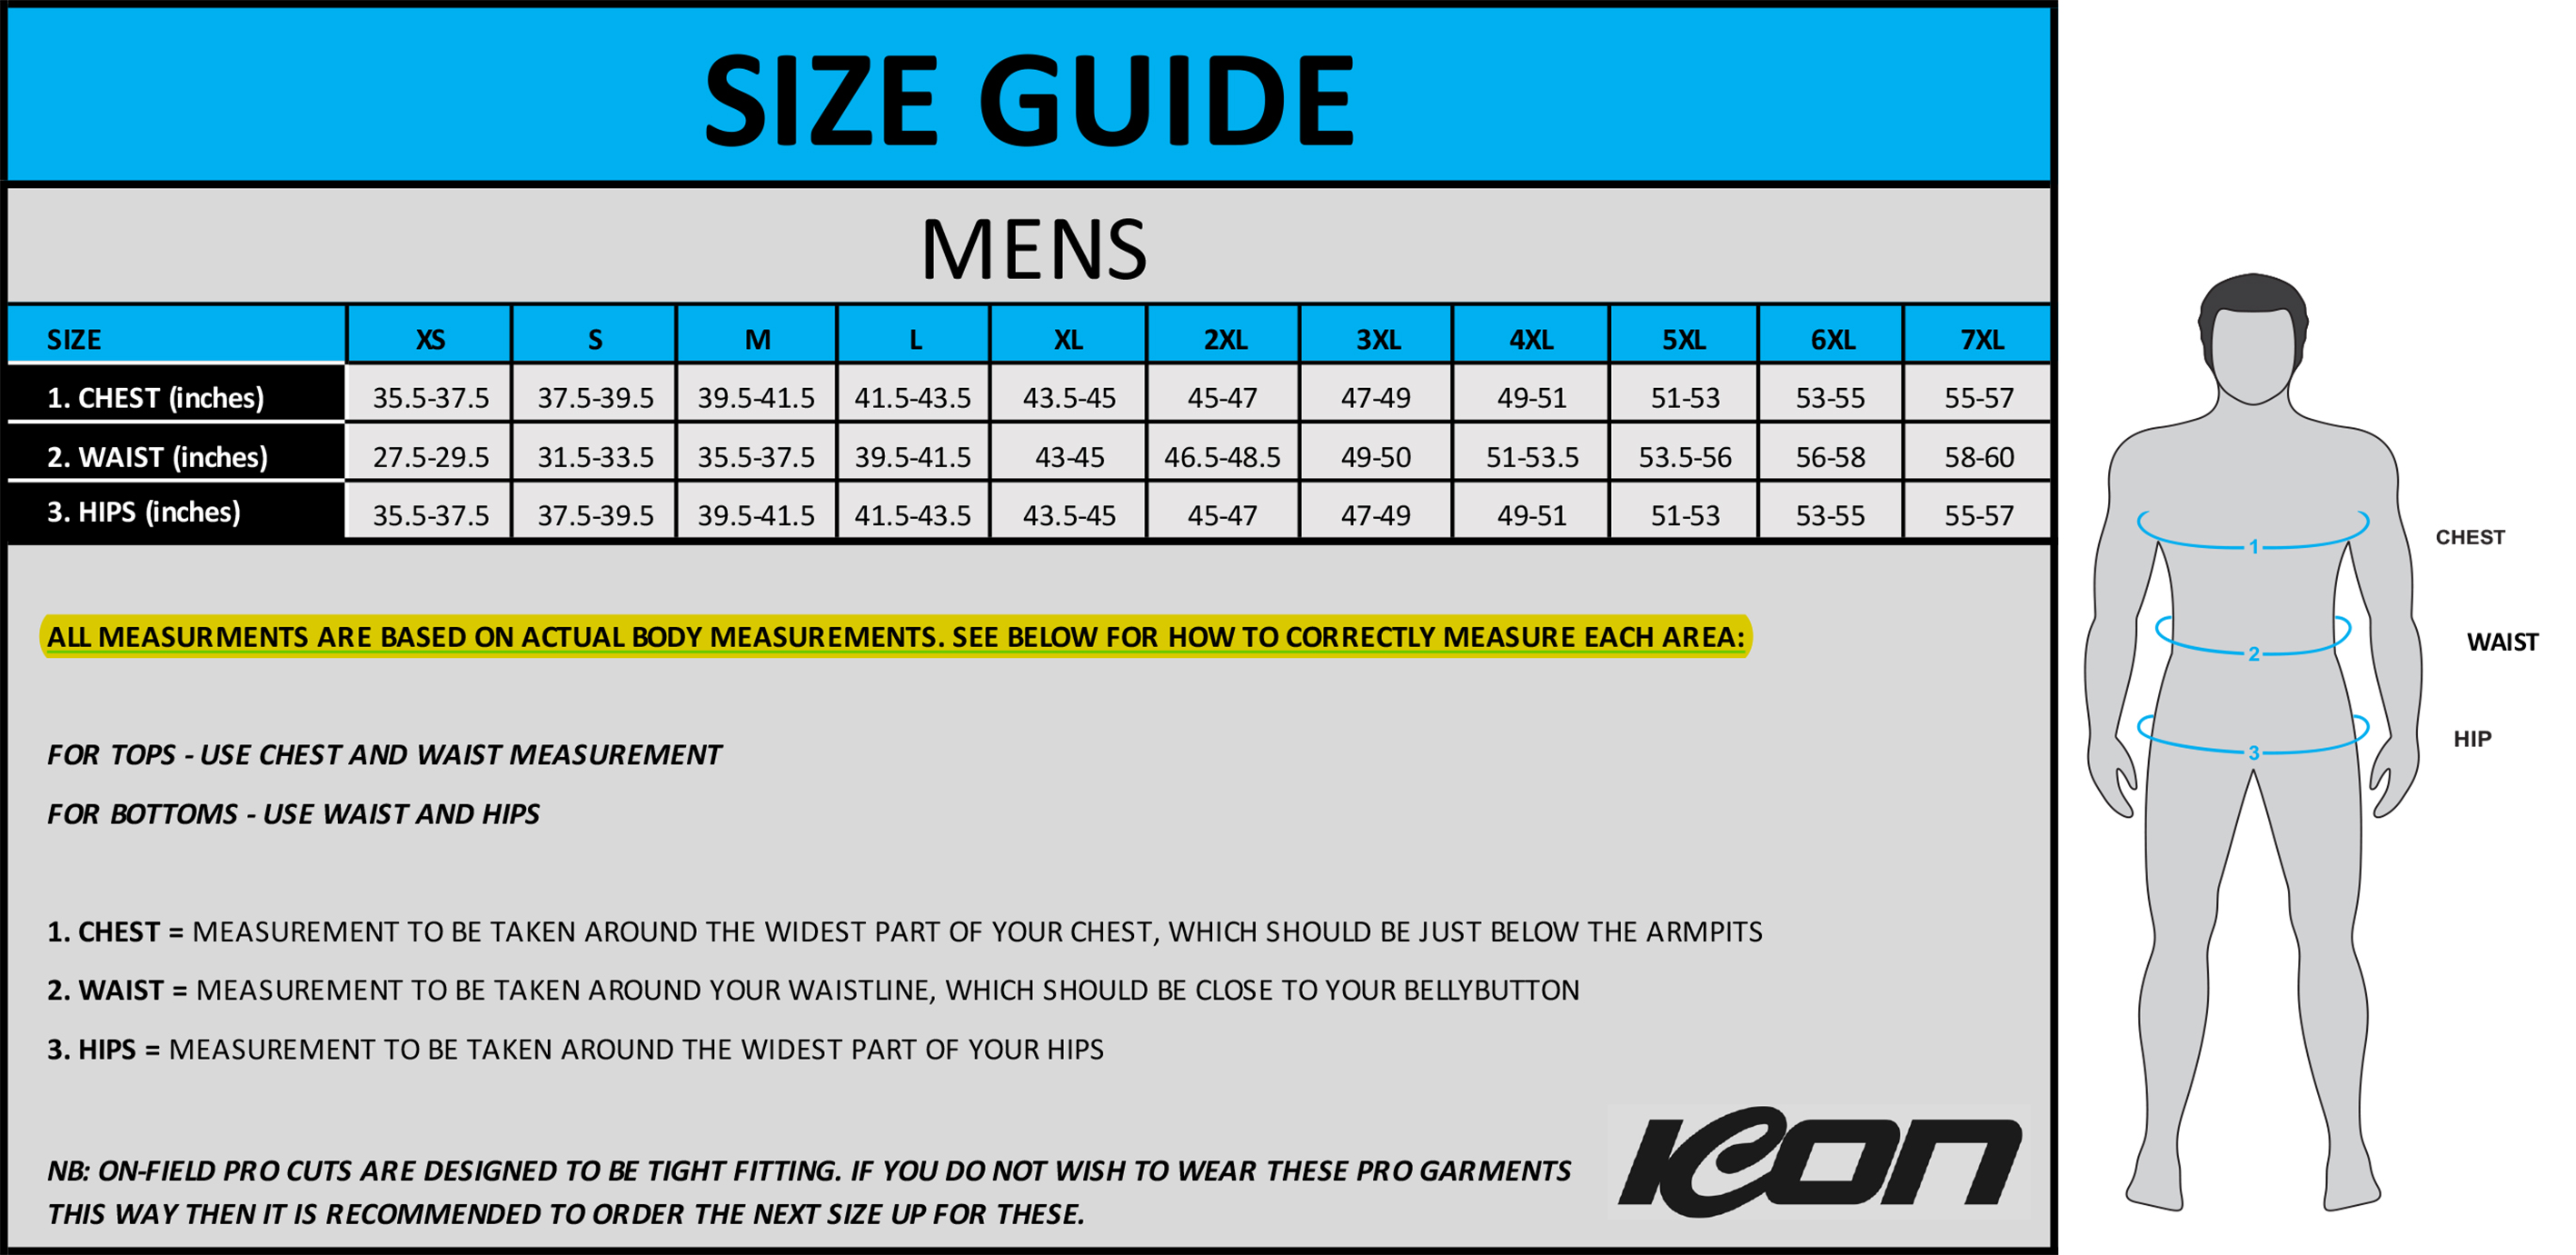 MENS SIZE GUIDE ICON UK.jpg